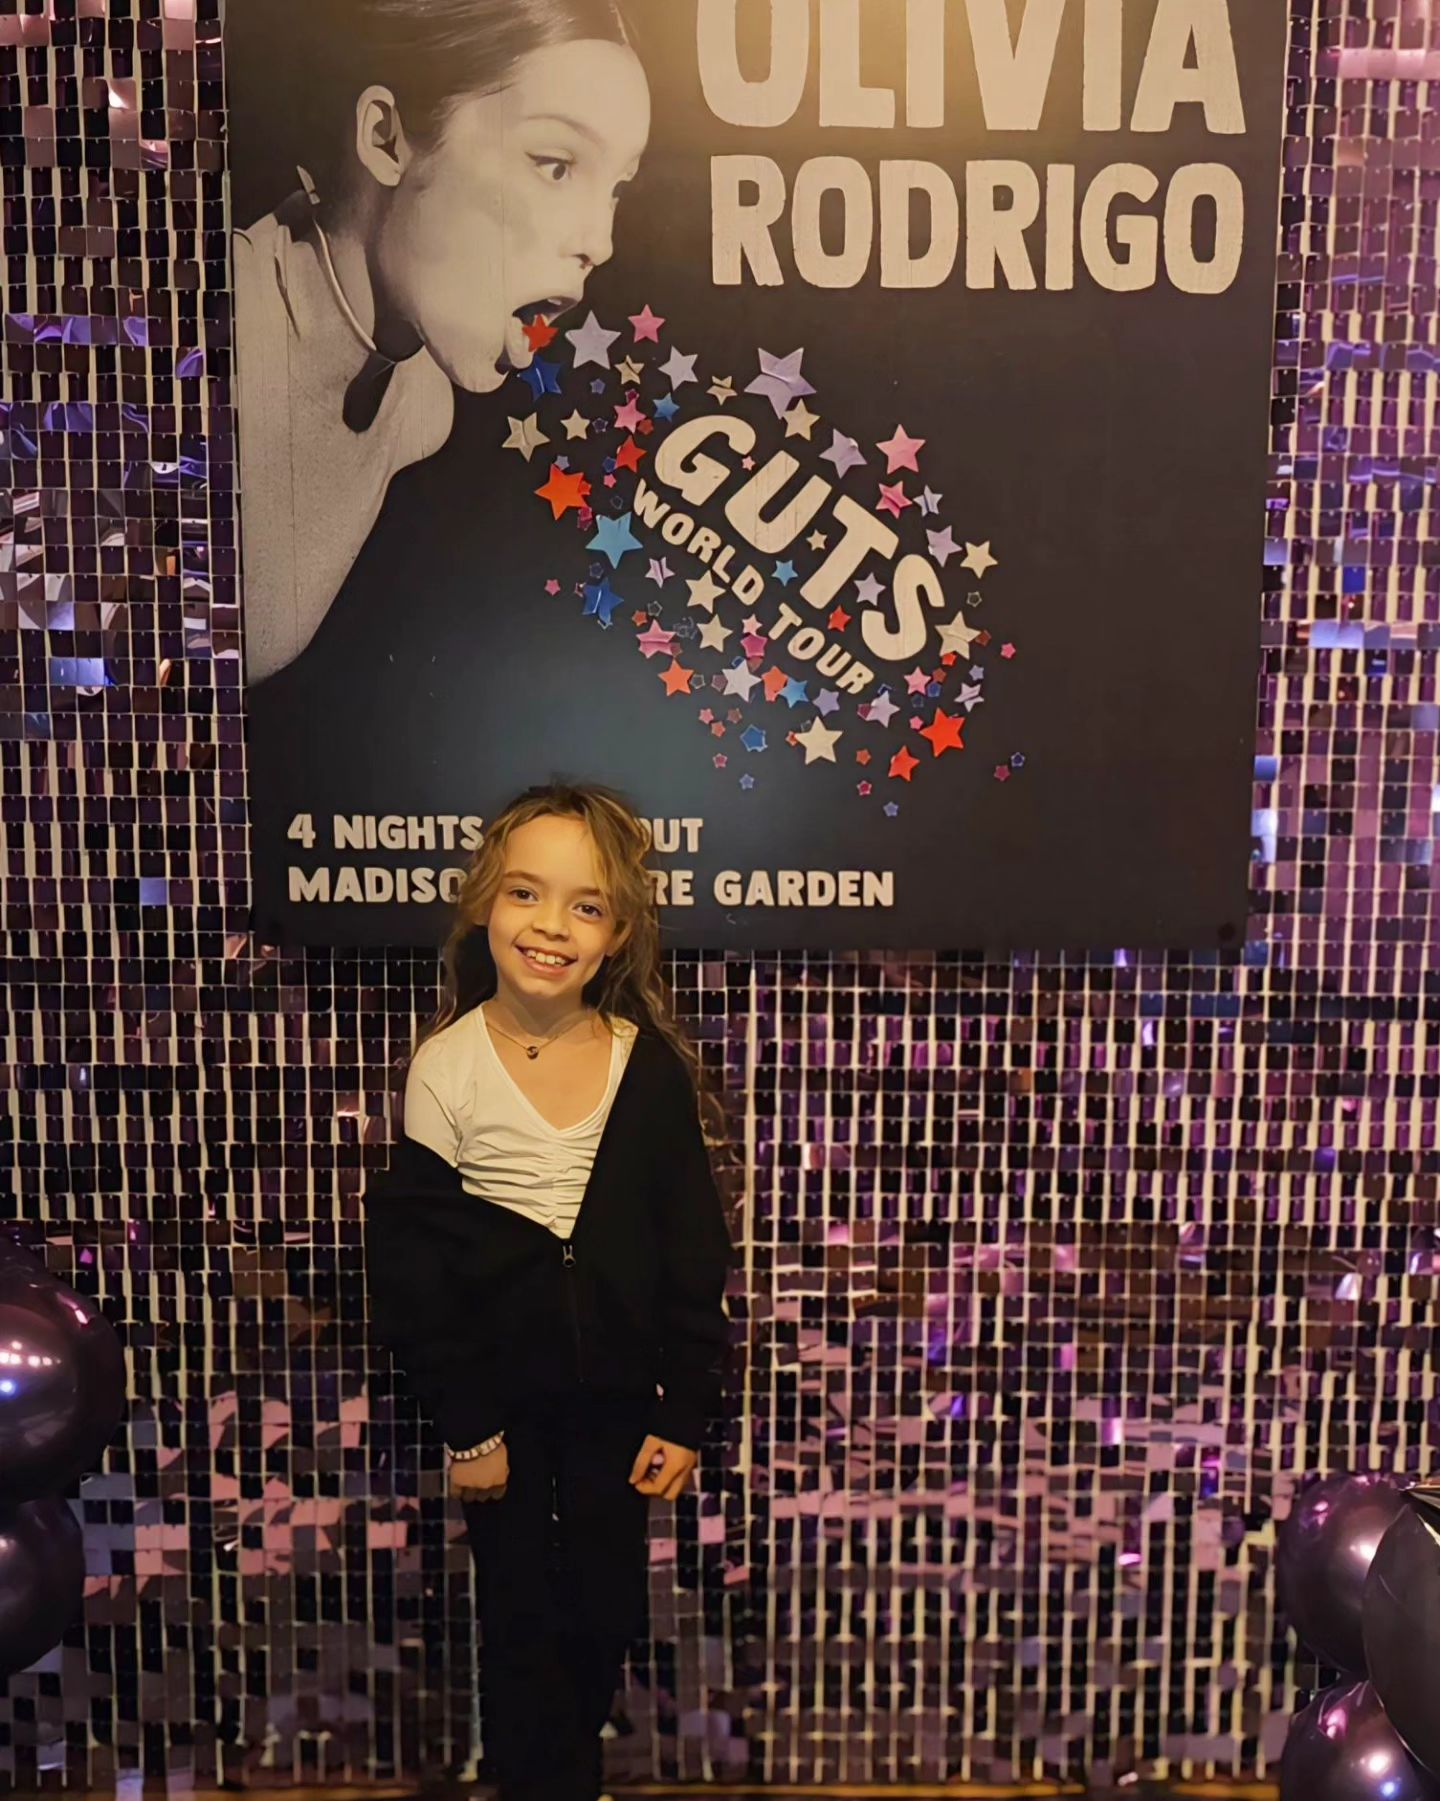 Went to @oliviarodrigo concert! This is Chanel's favorite singer!! We've been waiting for this moment since last September ( 8months ago) She is obsessed with her! Of course our girl crew came along!
-swipe
#springbreak